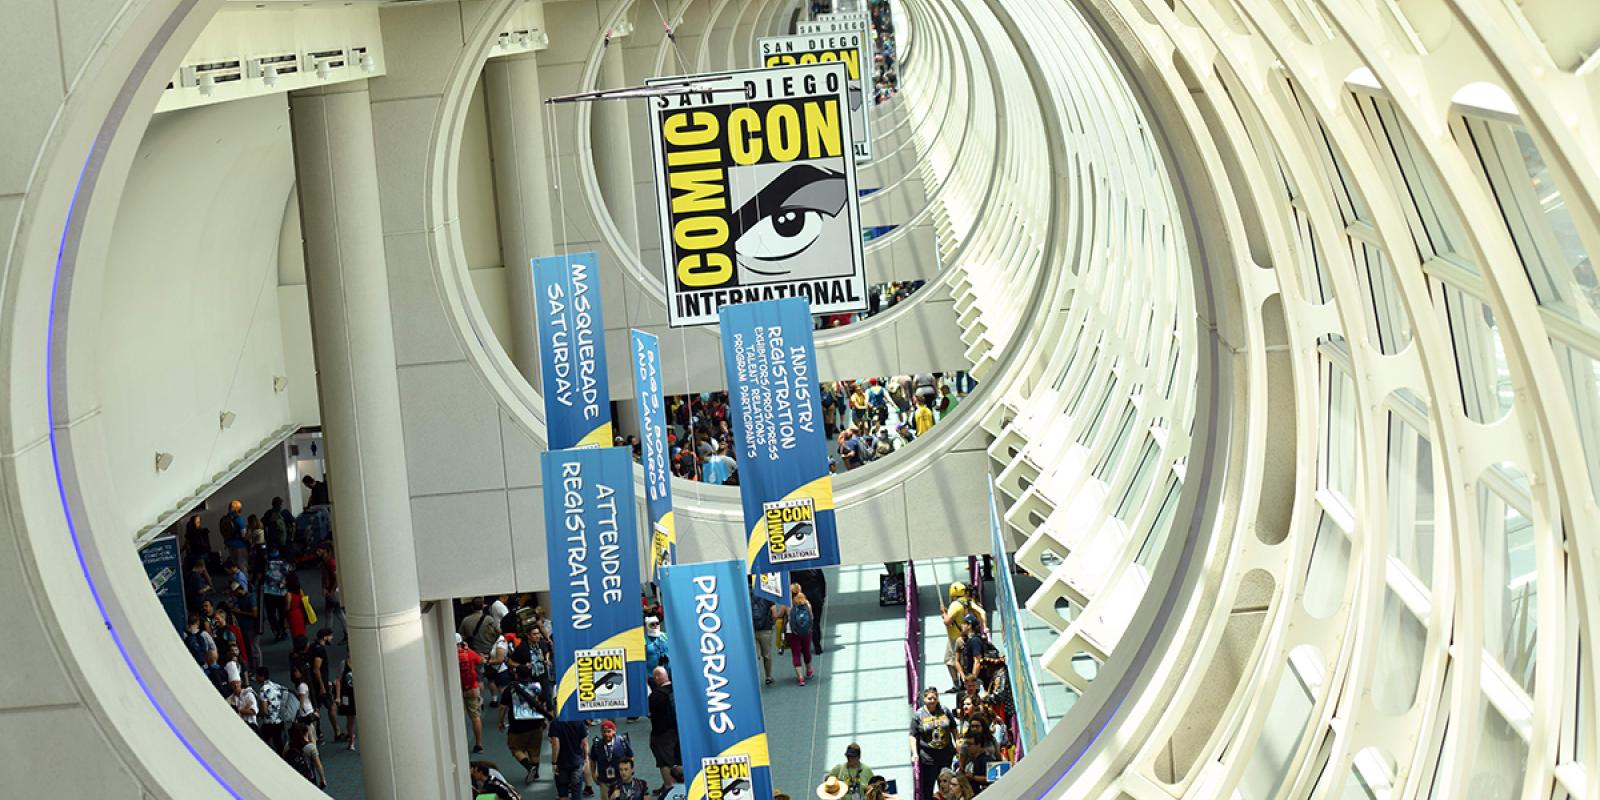 4 Principles of Immersive Marketing From Comic-Con